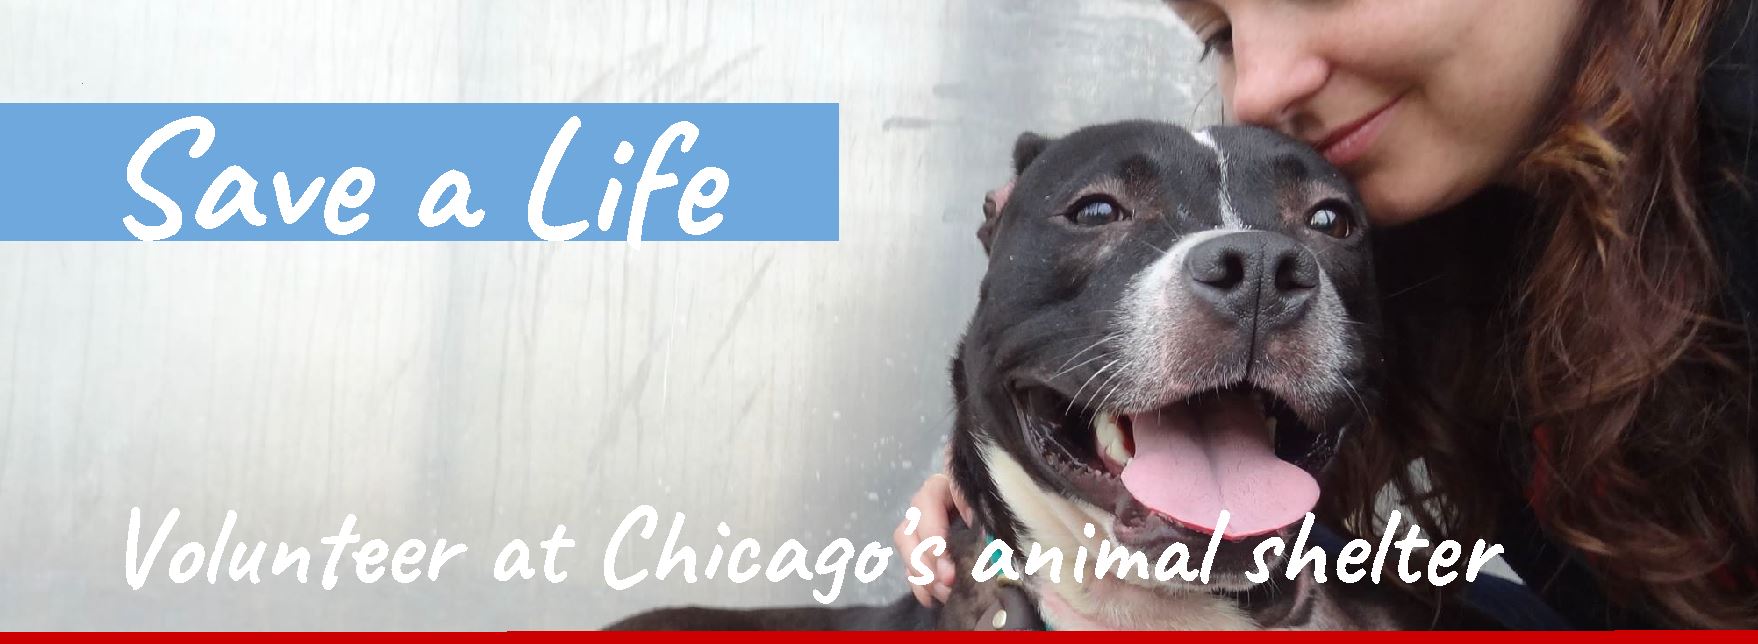 Save A Life - Volunteer at Chicago's Animal Shelter